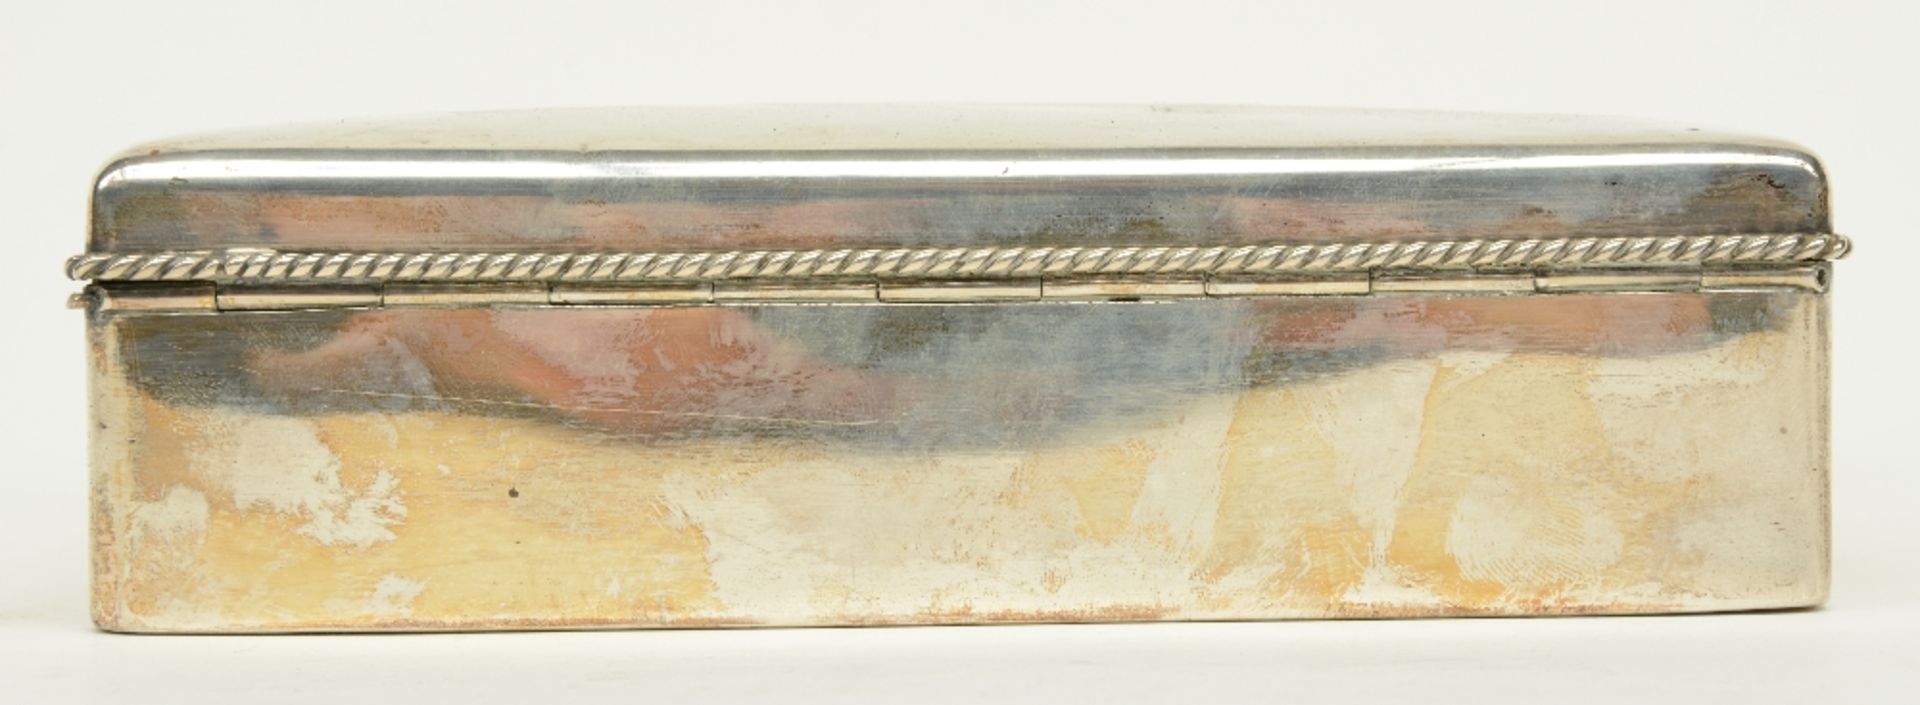 An early 20thC silver cigar box, 835/000, with a wooden inside, H 5,5 - W 18,5 - D 13,5 cm, Total - Bild 4 aus 7